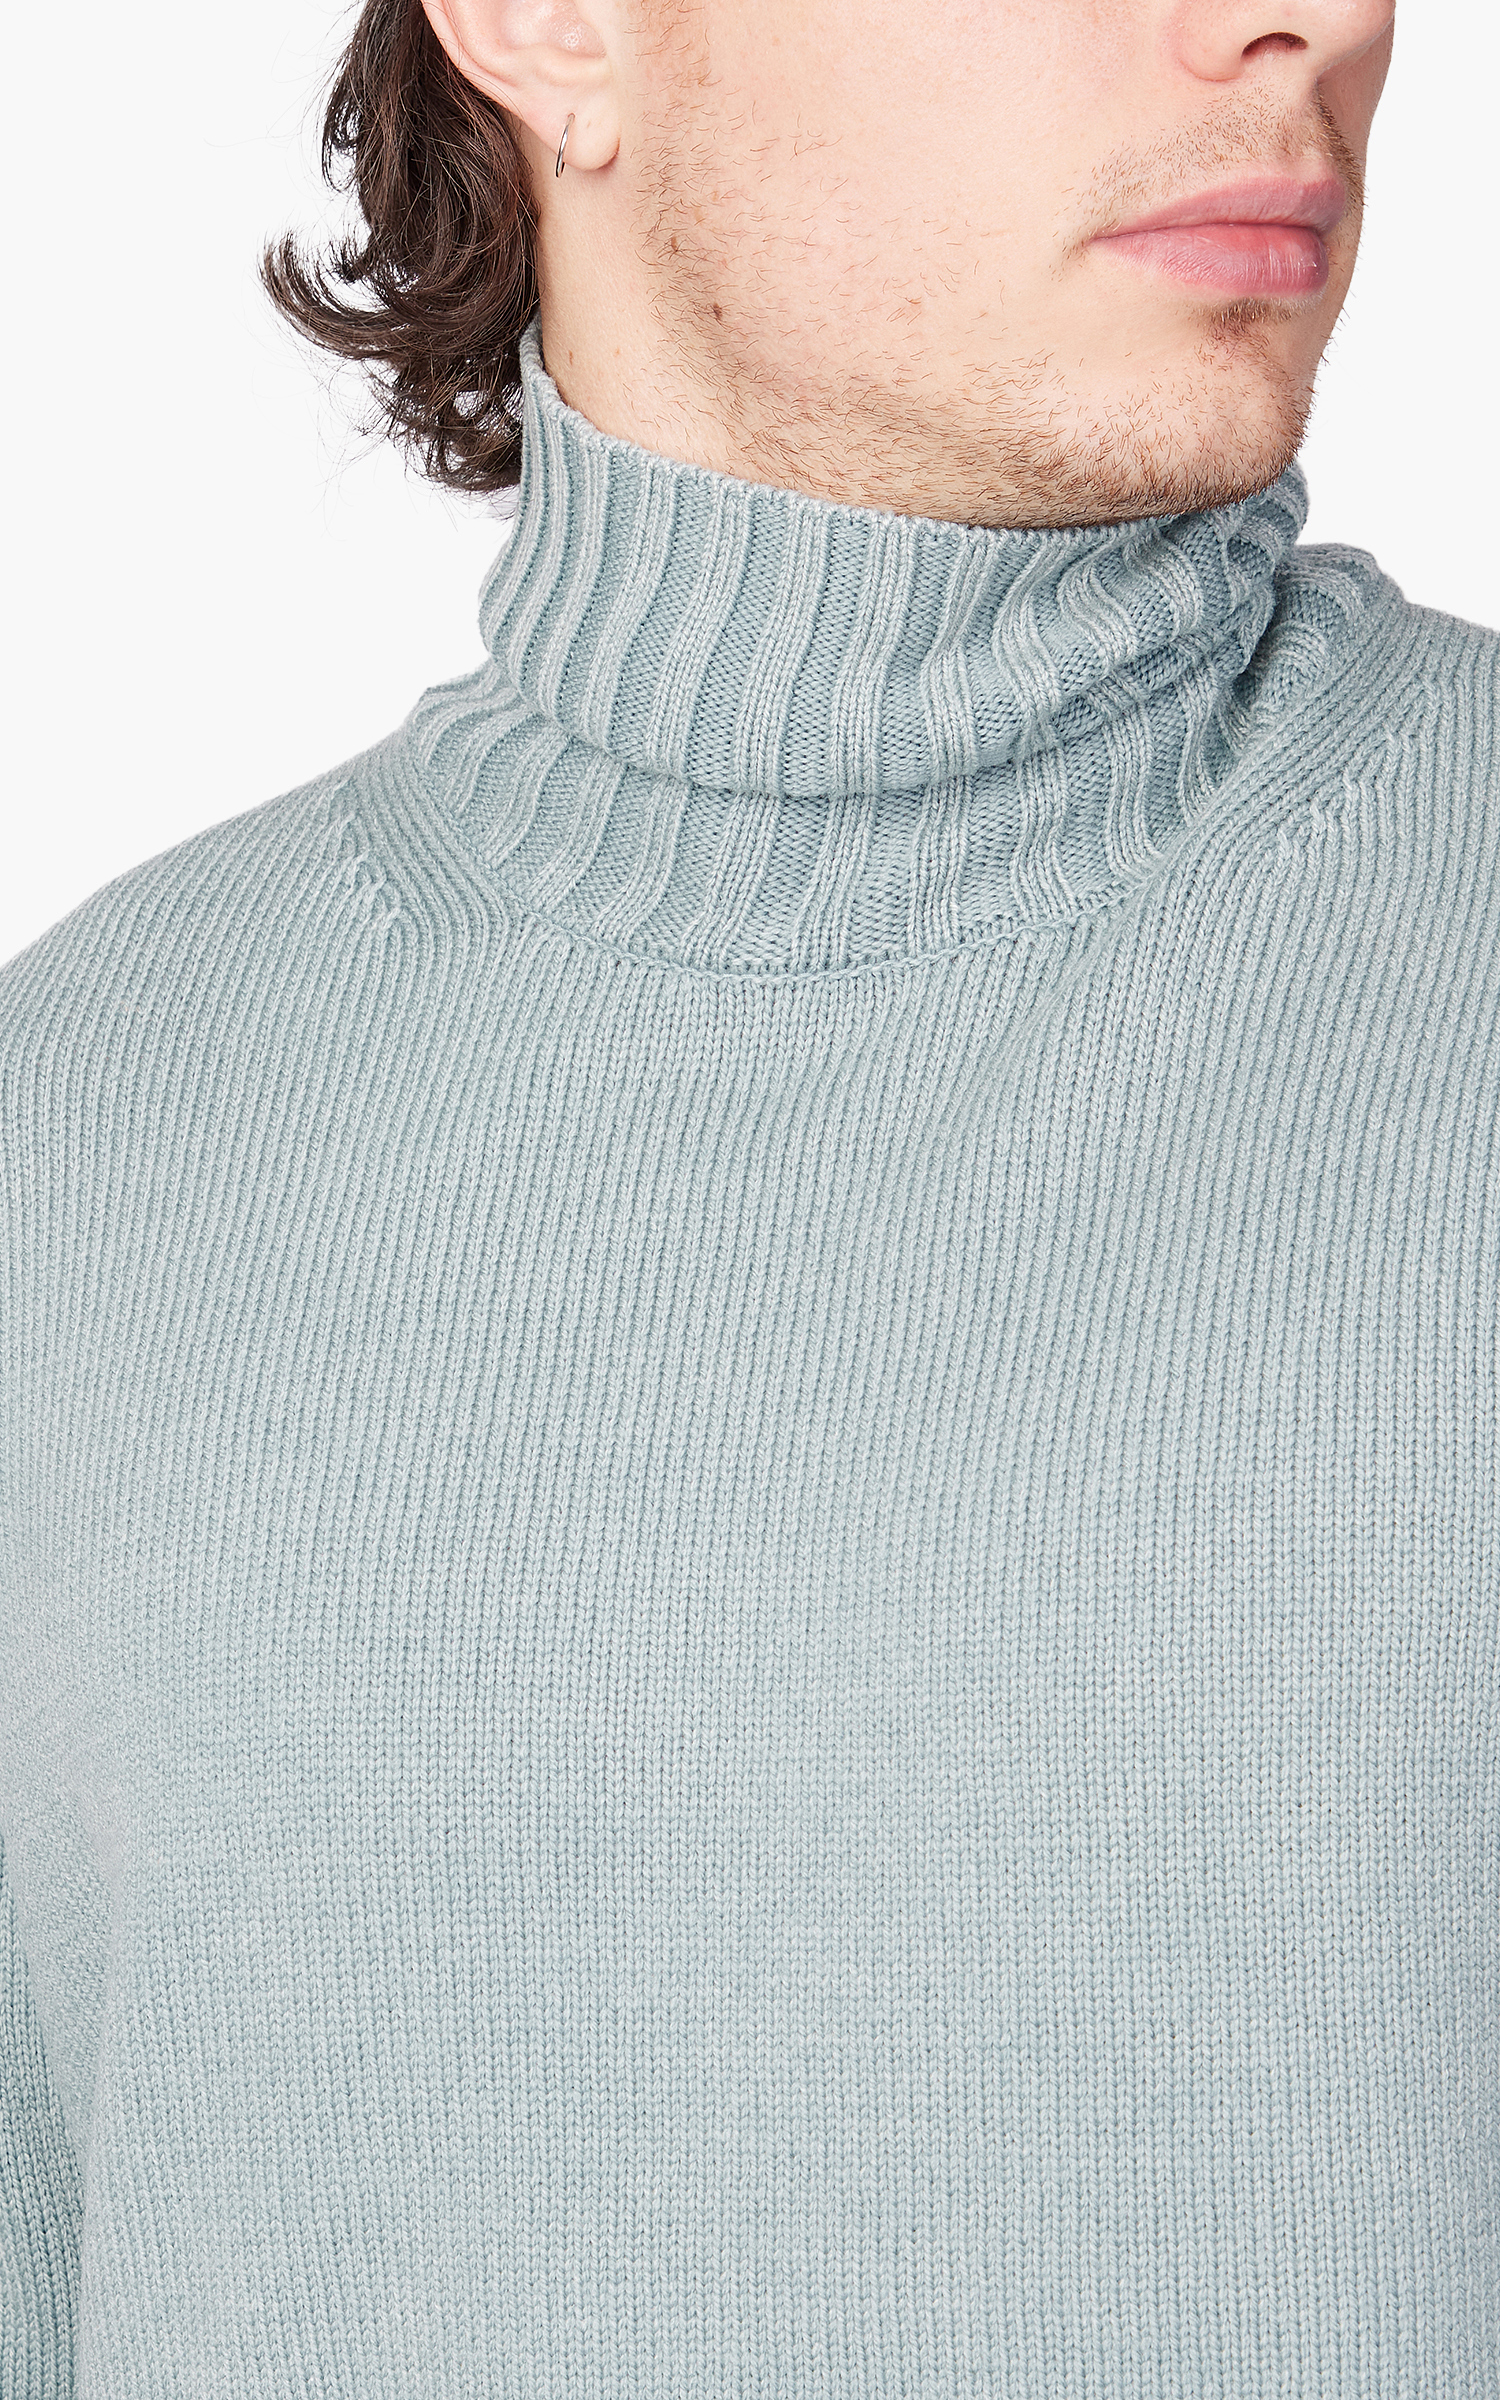 AURALEE WASHED FRENCH MERINO KNIT P/O メンズ | up3d.jp